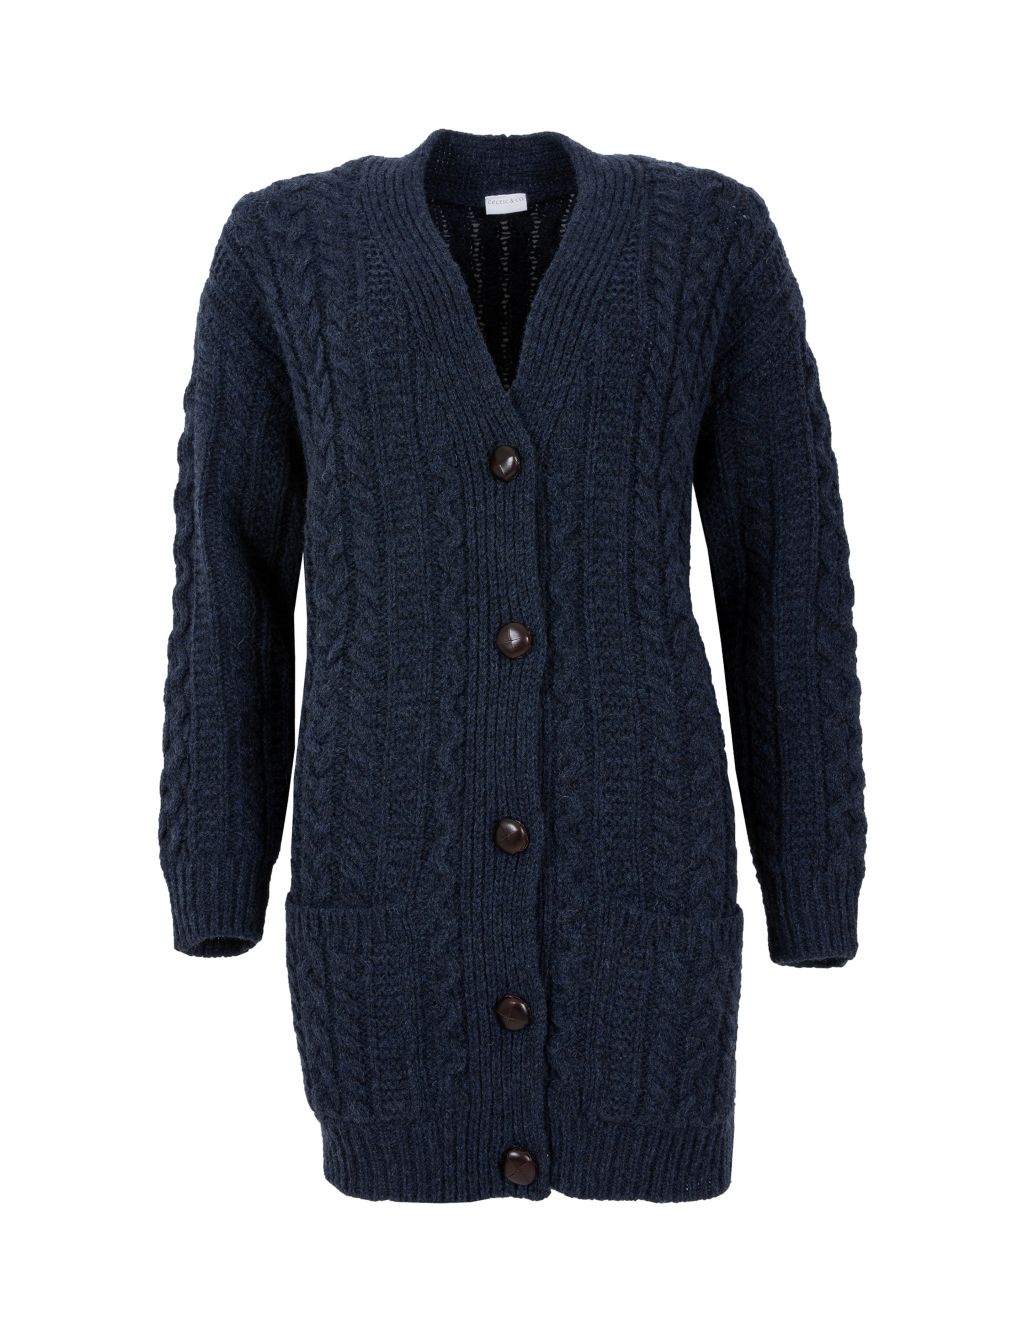 Pure Wool Cable Knit V-Neck Cardigan image 2